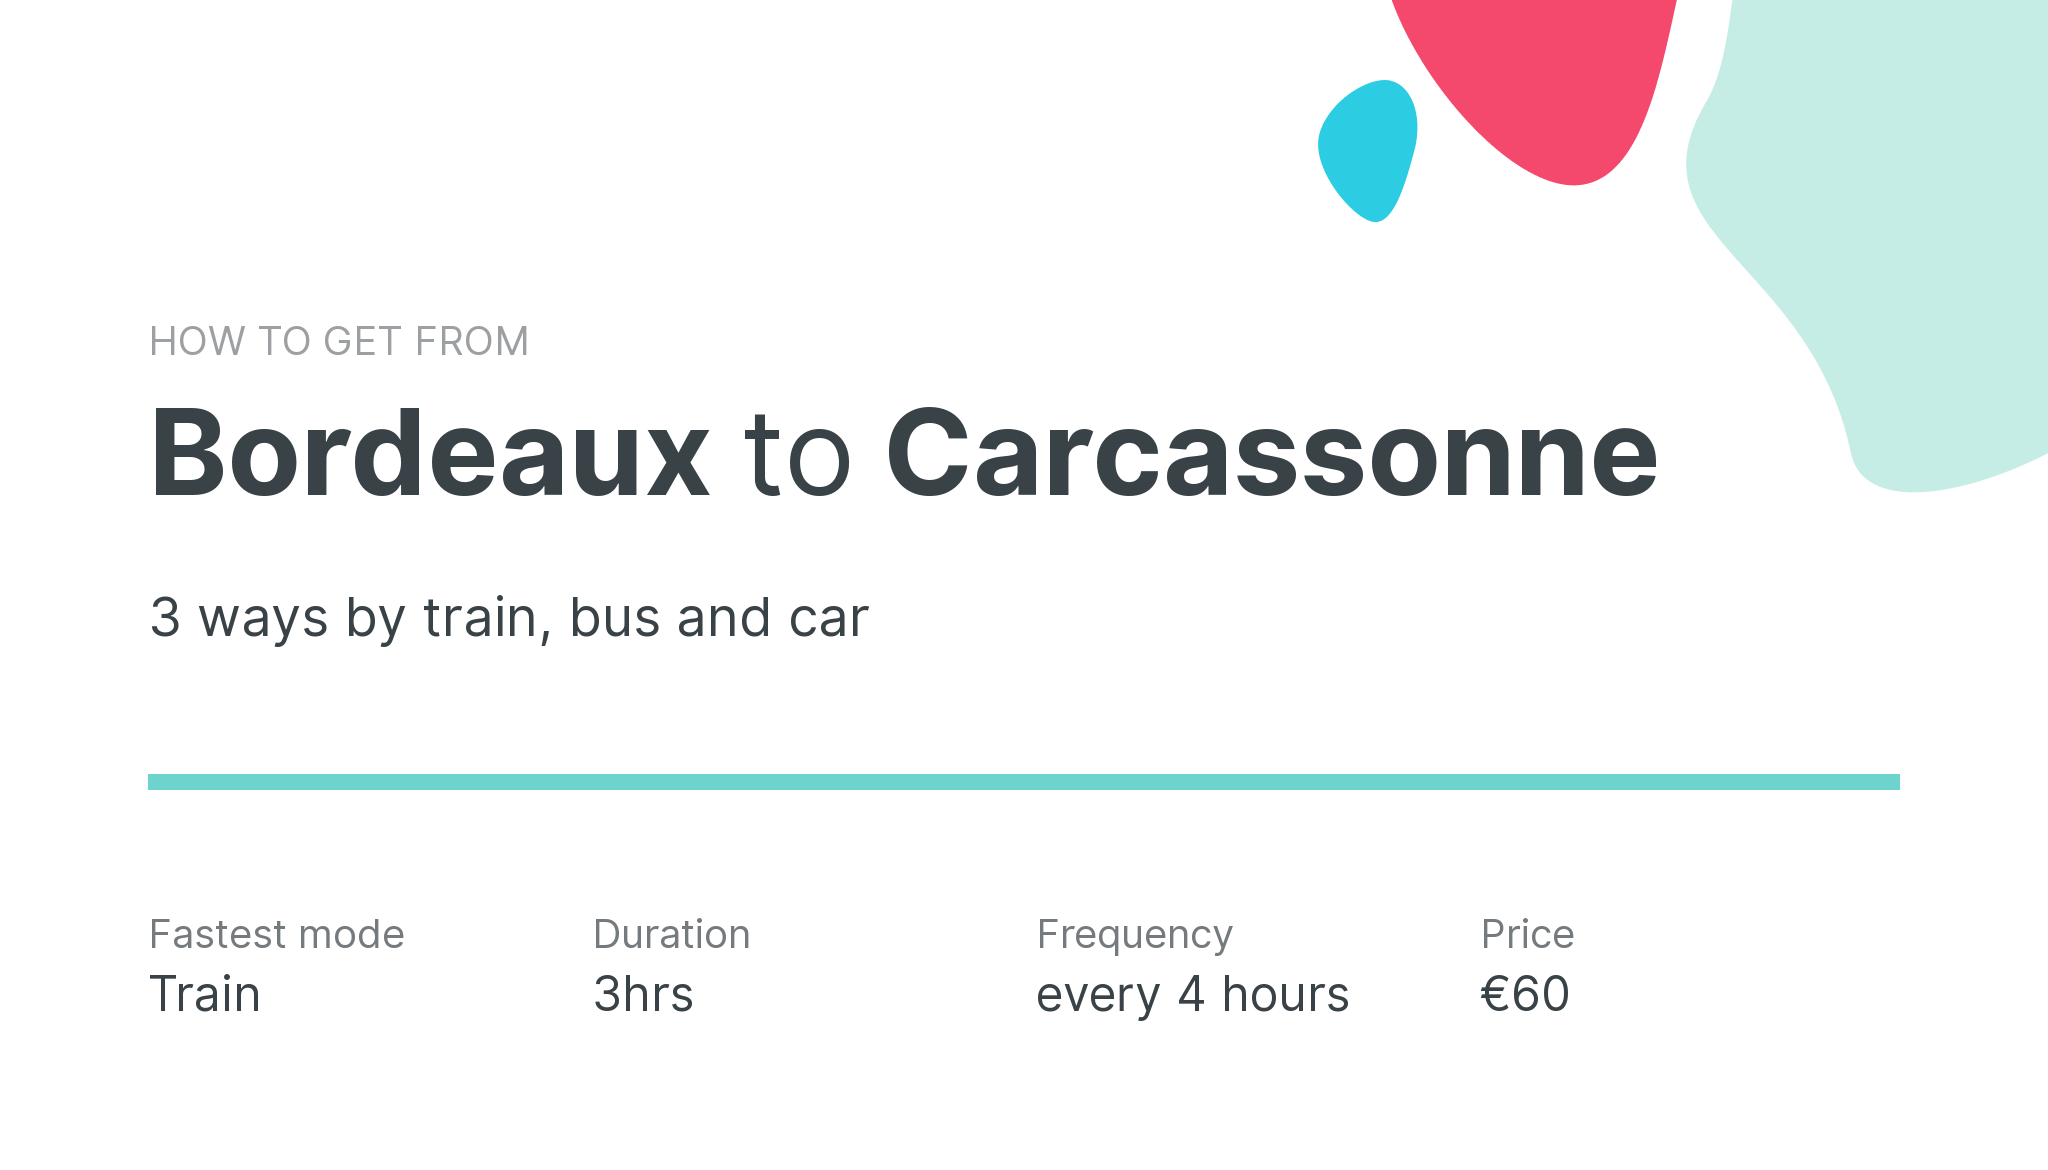 How do I get from Bordeaux to Carcassonne